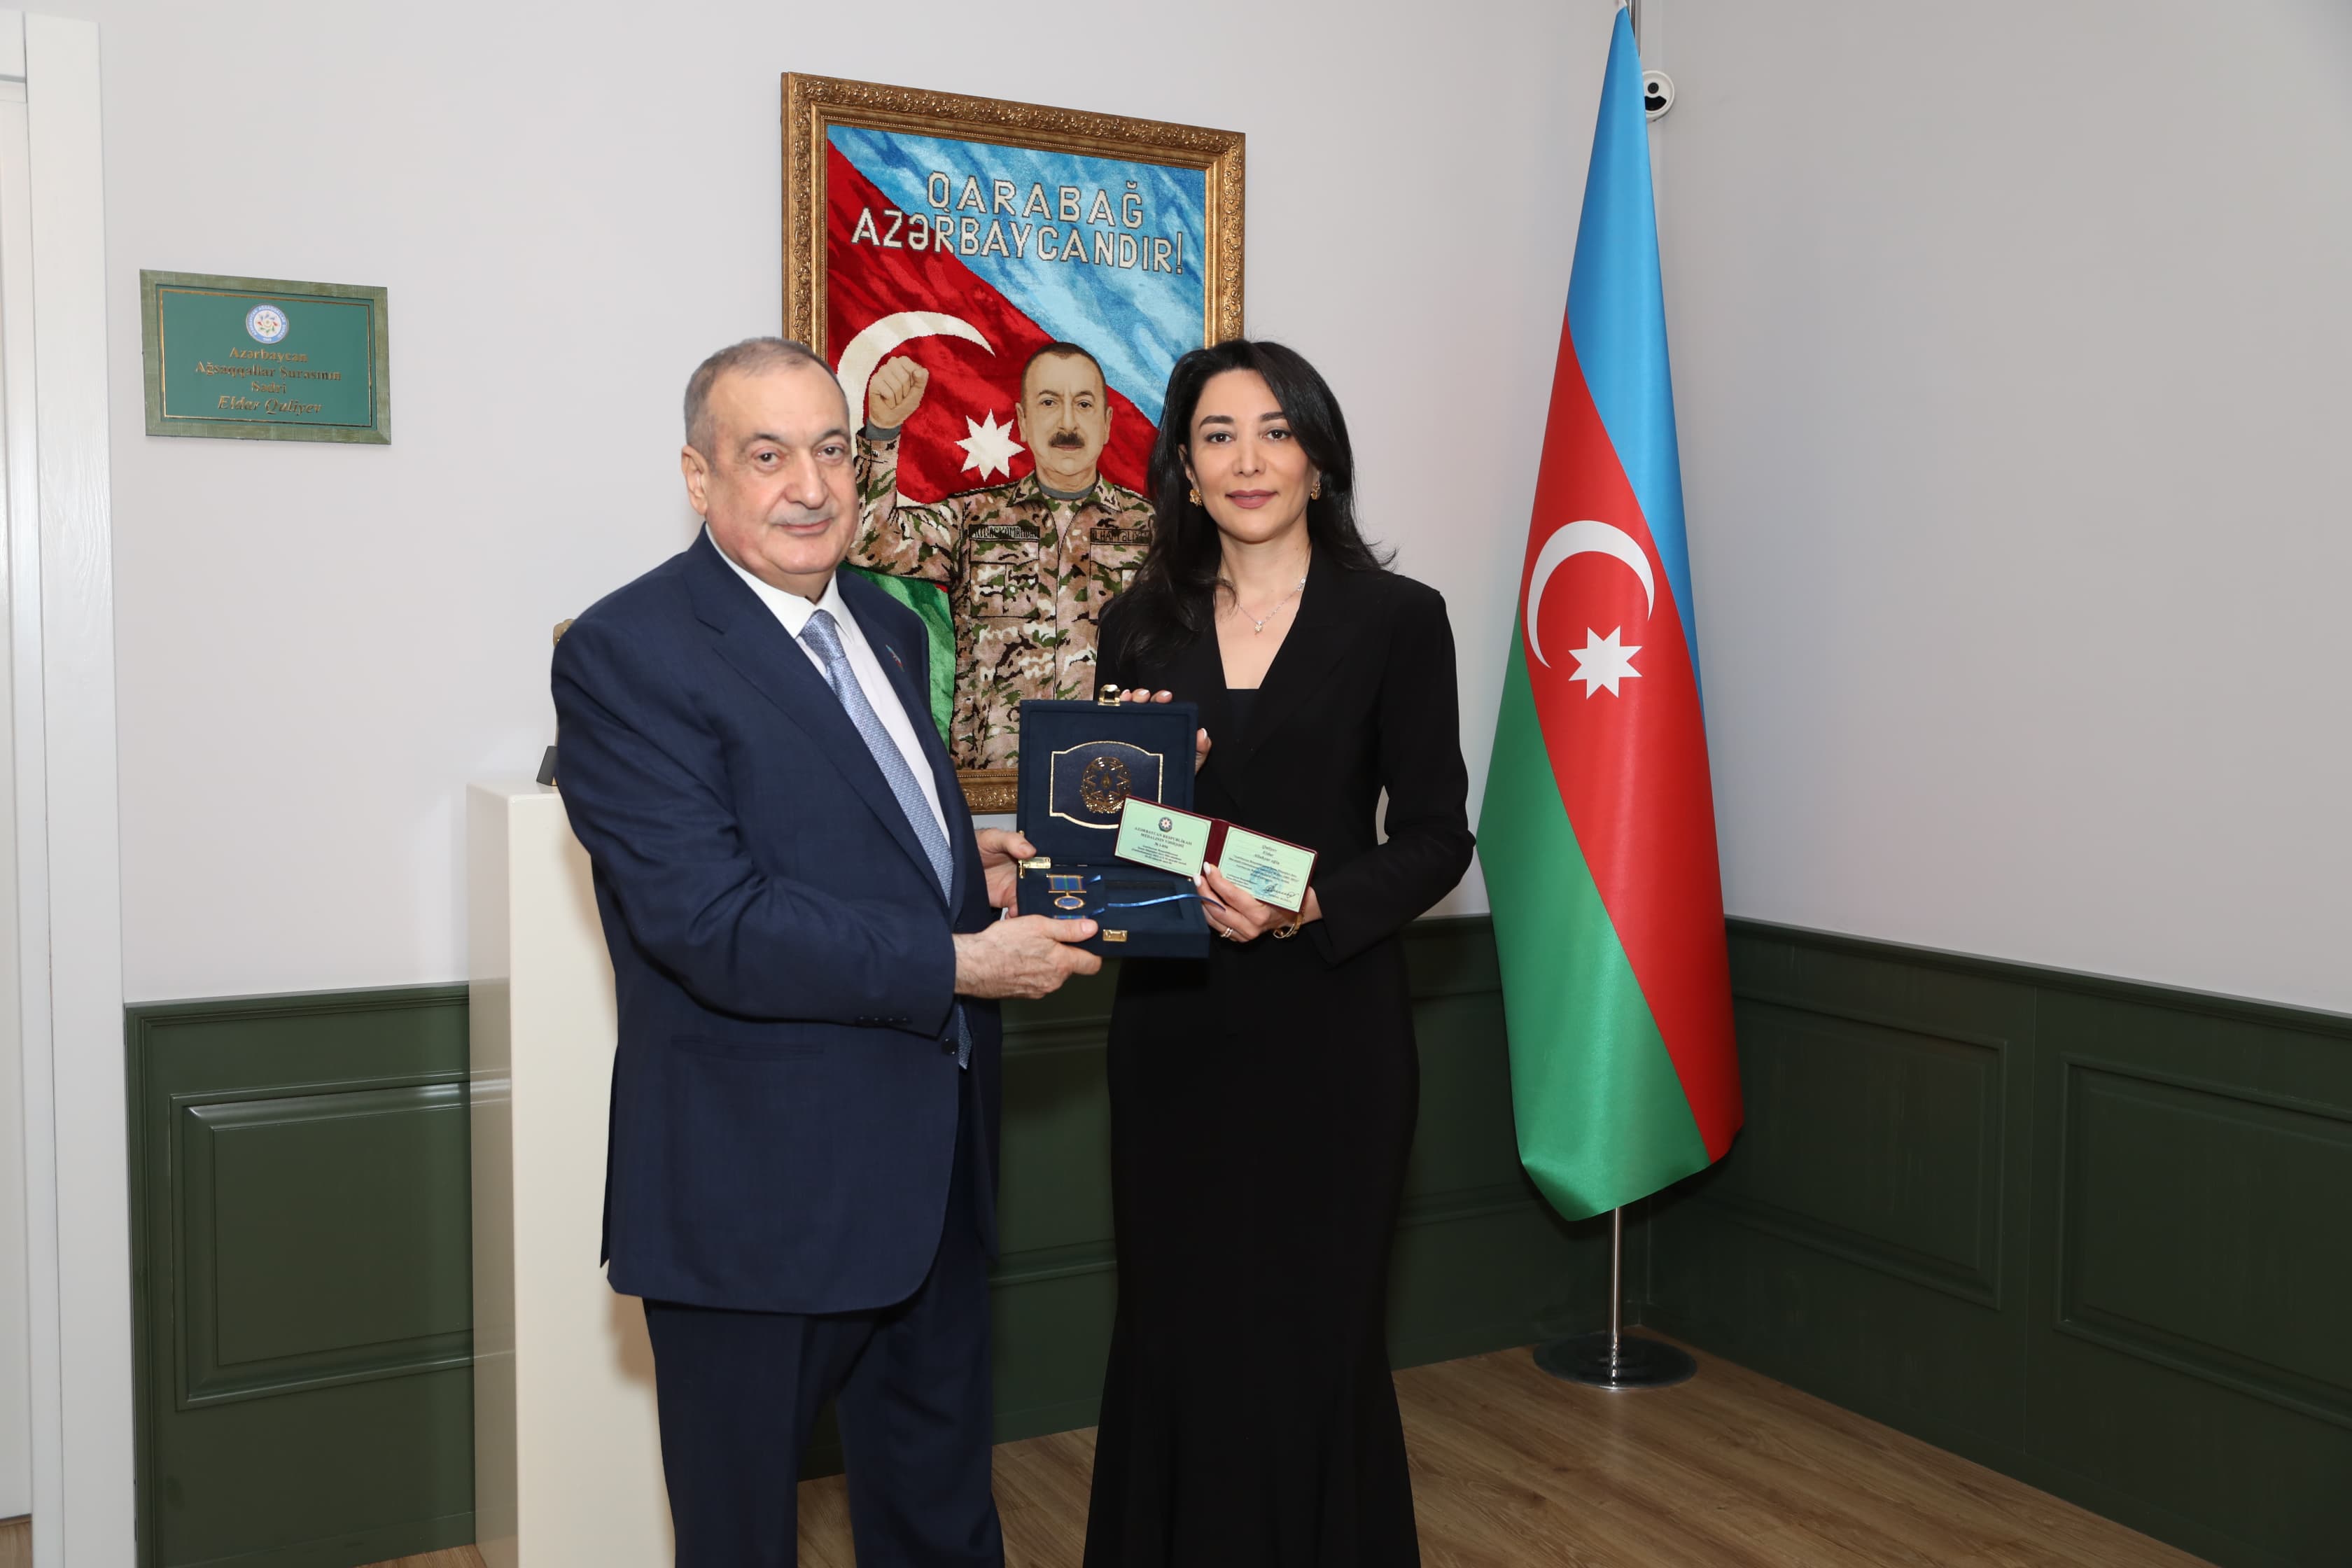 The Ombudsman awarded the Chair of the Council of Elders of Azerbaijan with the Ombudsman Institution’s Jubilee Medal